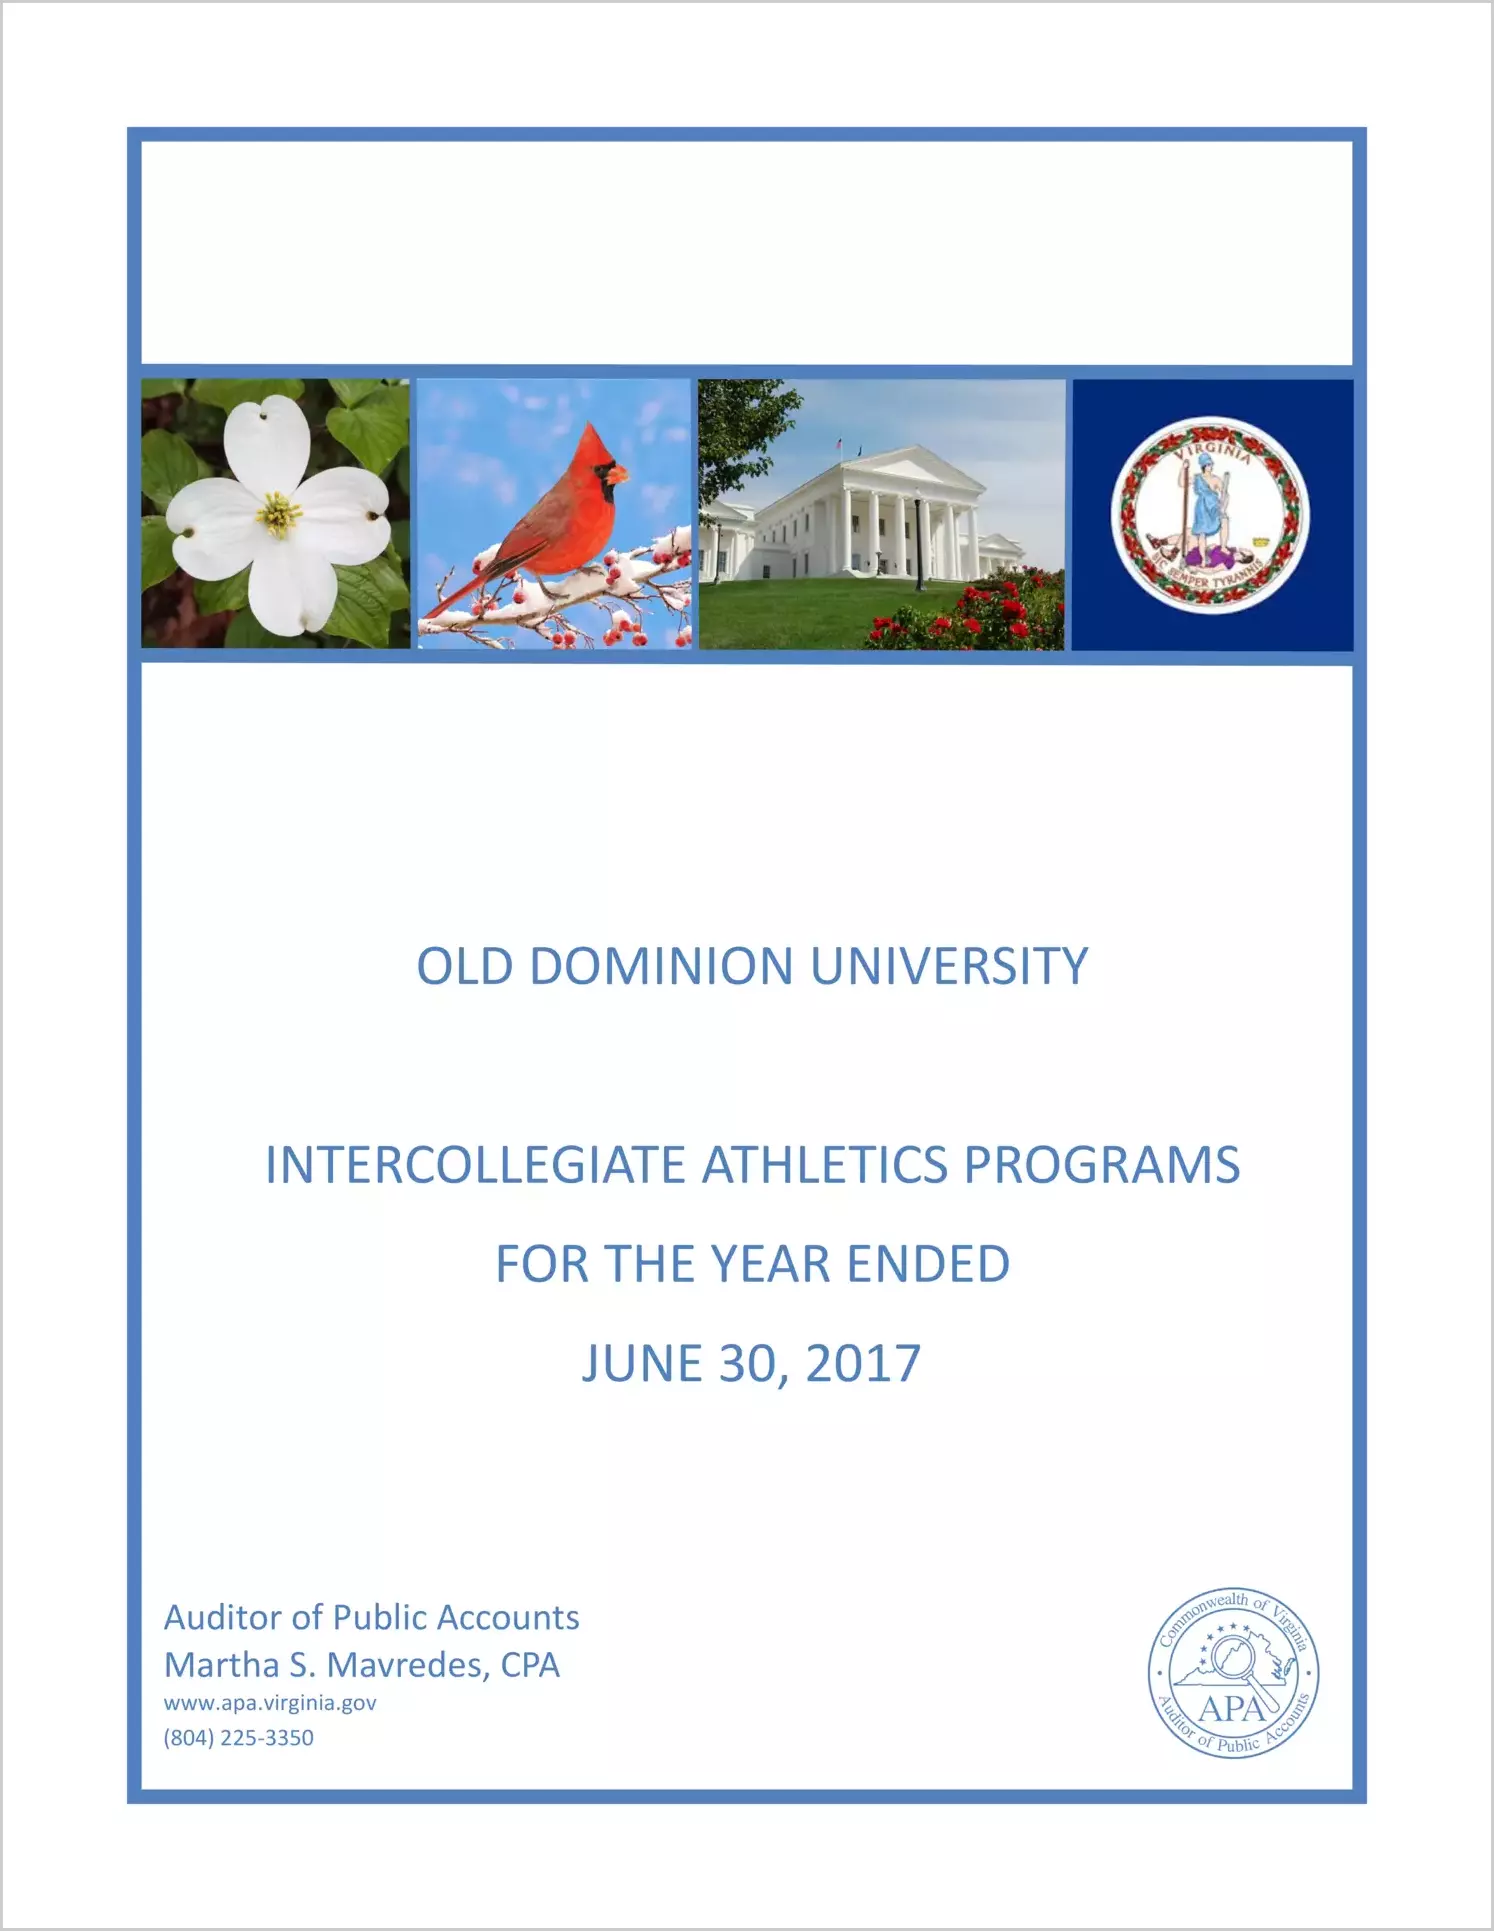 Old Dominion University Intercollegiate Athletics Programs for the year ended June 30, 2017